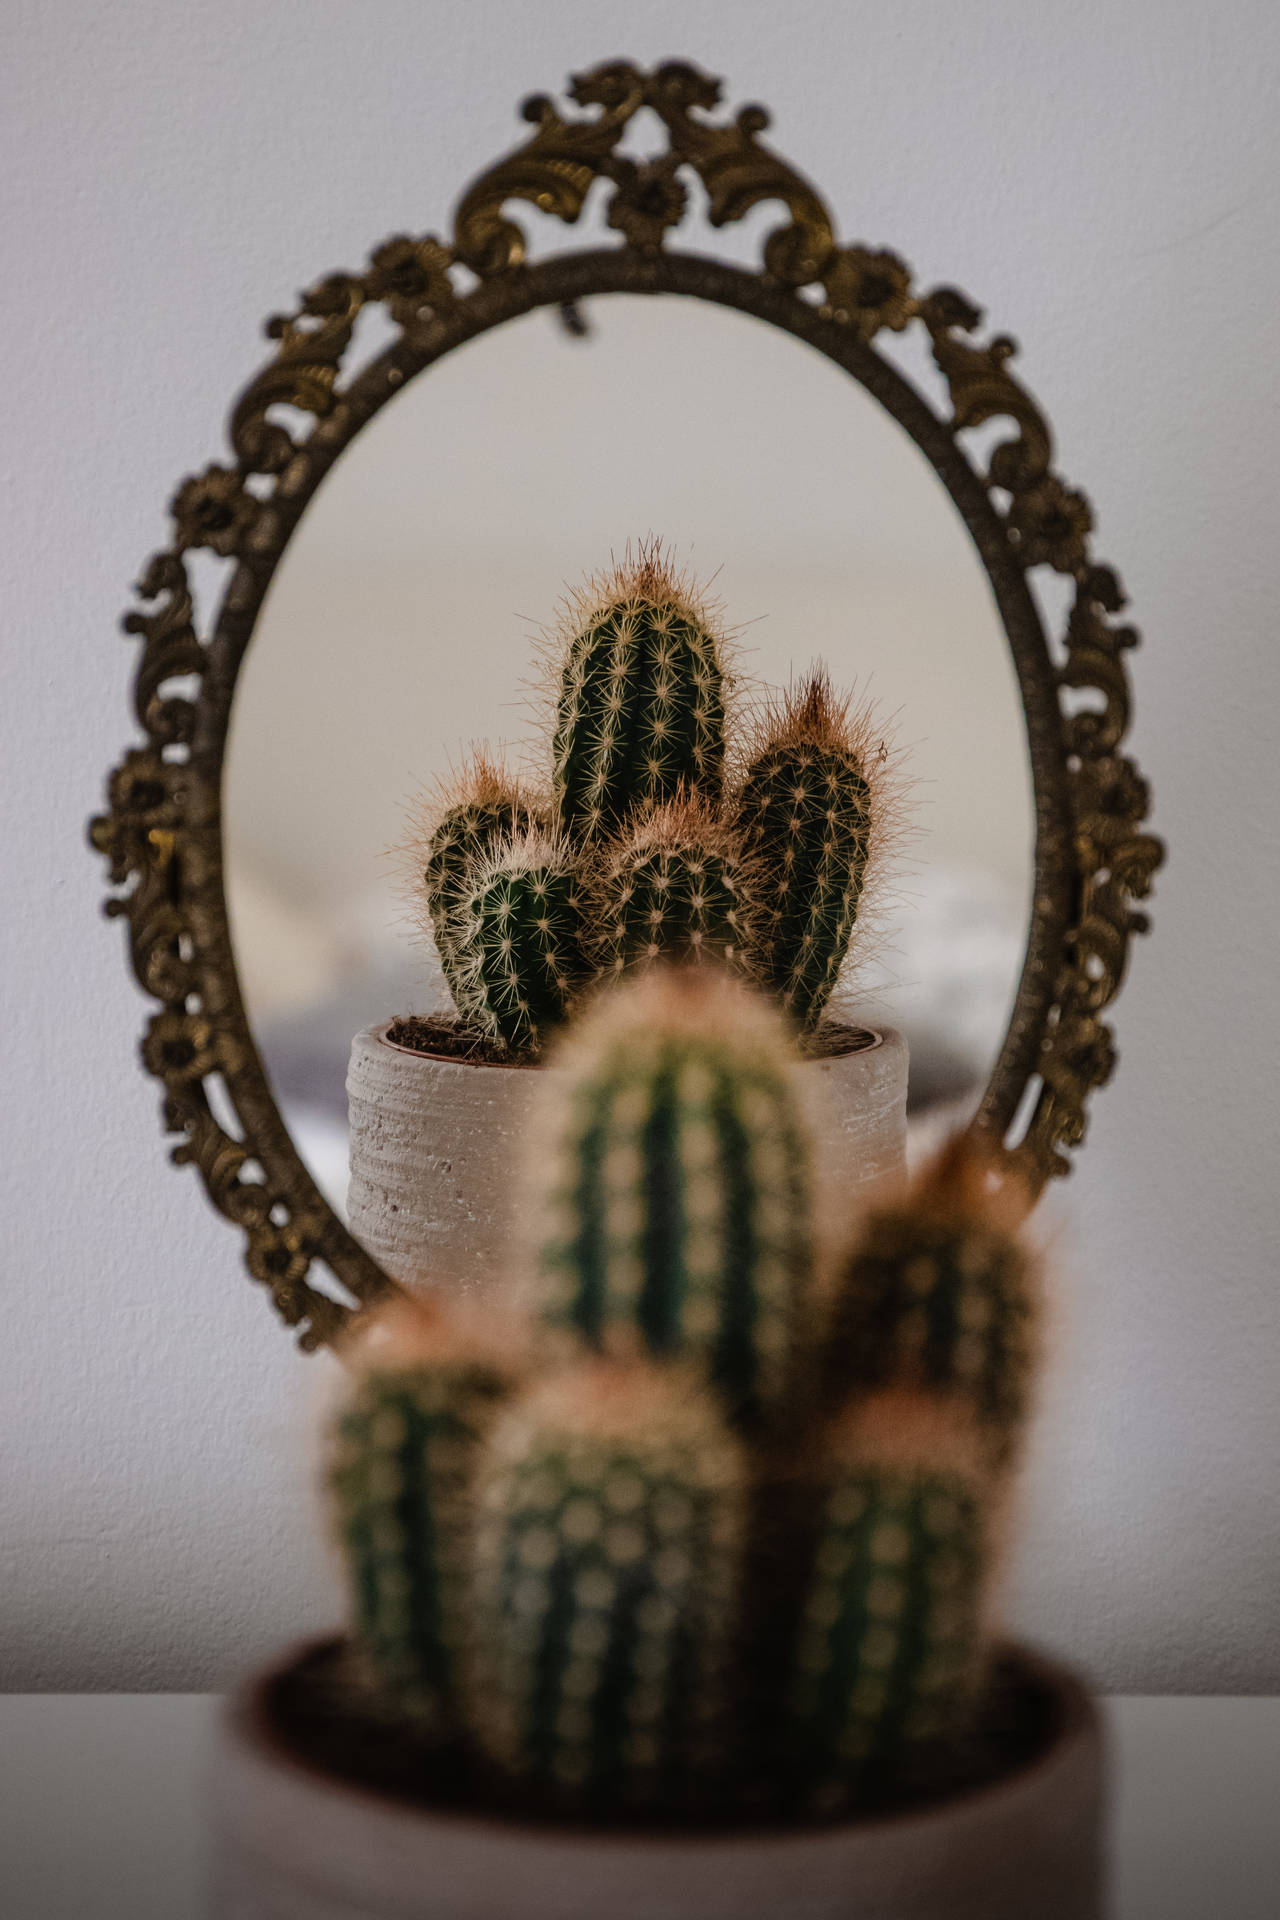 Cactus 3661X5491 Wallpaper and Background Image